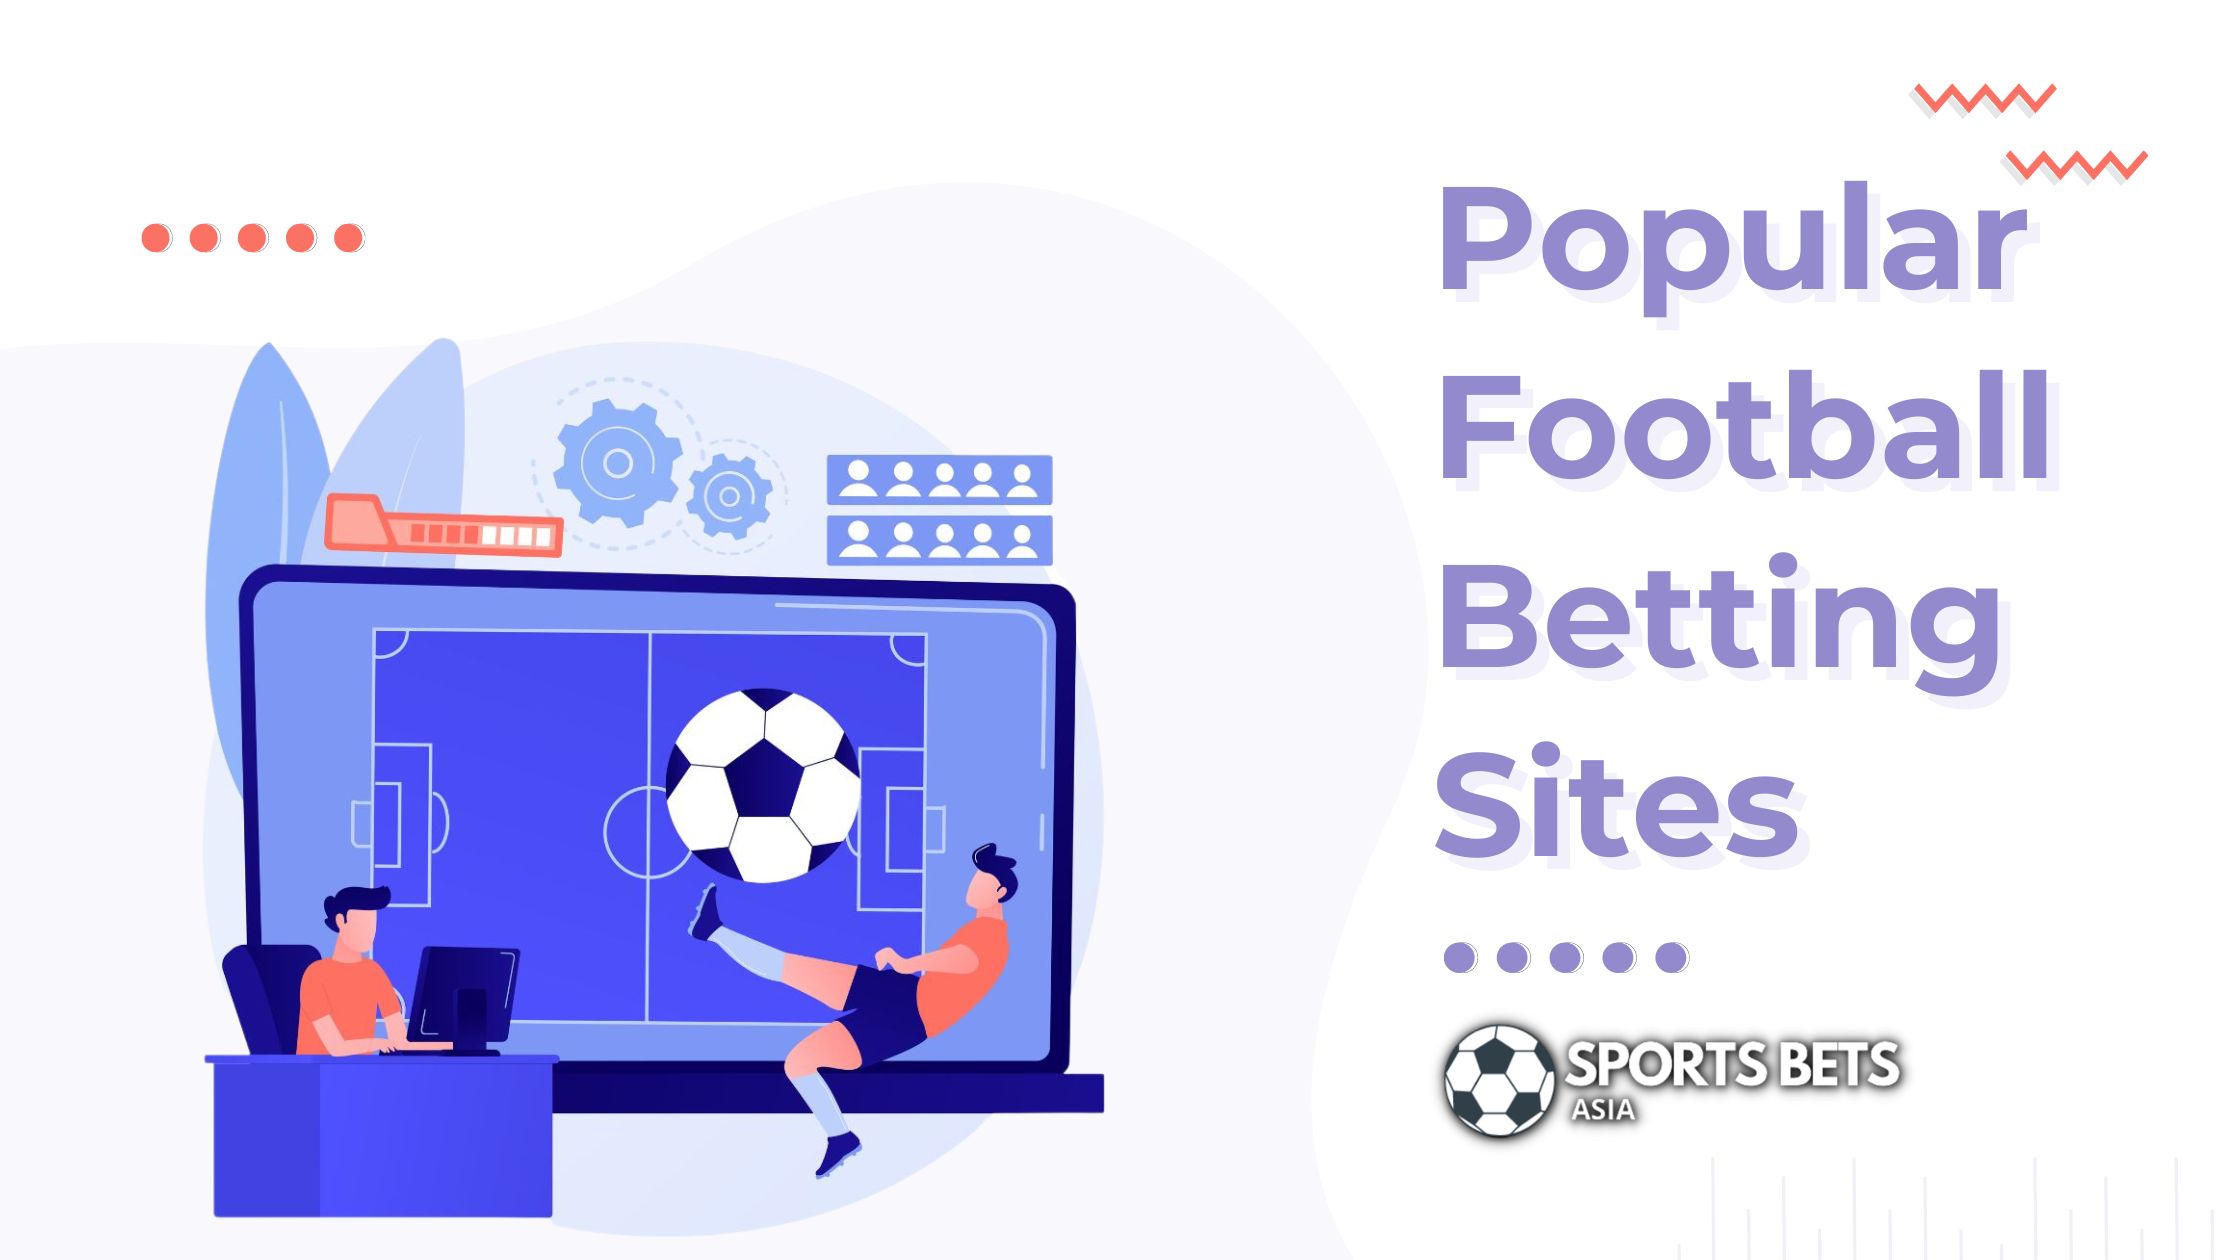 Popular Football Betting Sites- Sports Bets Asia